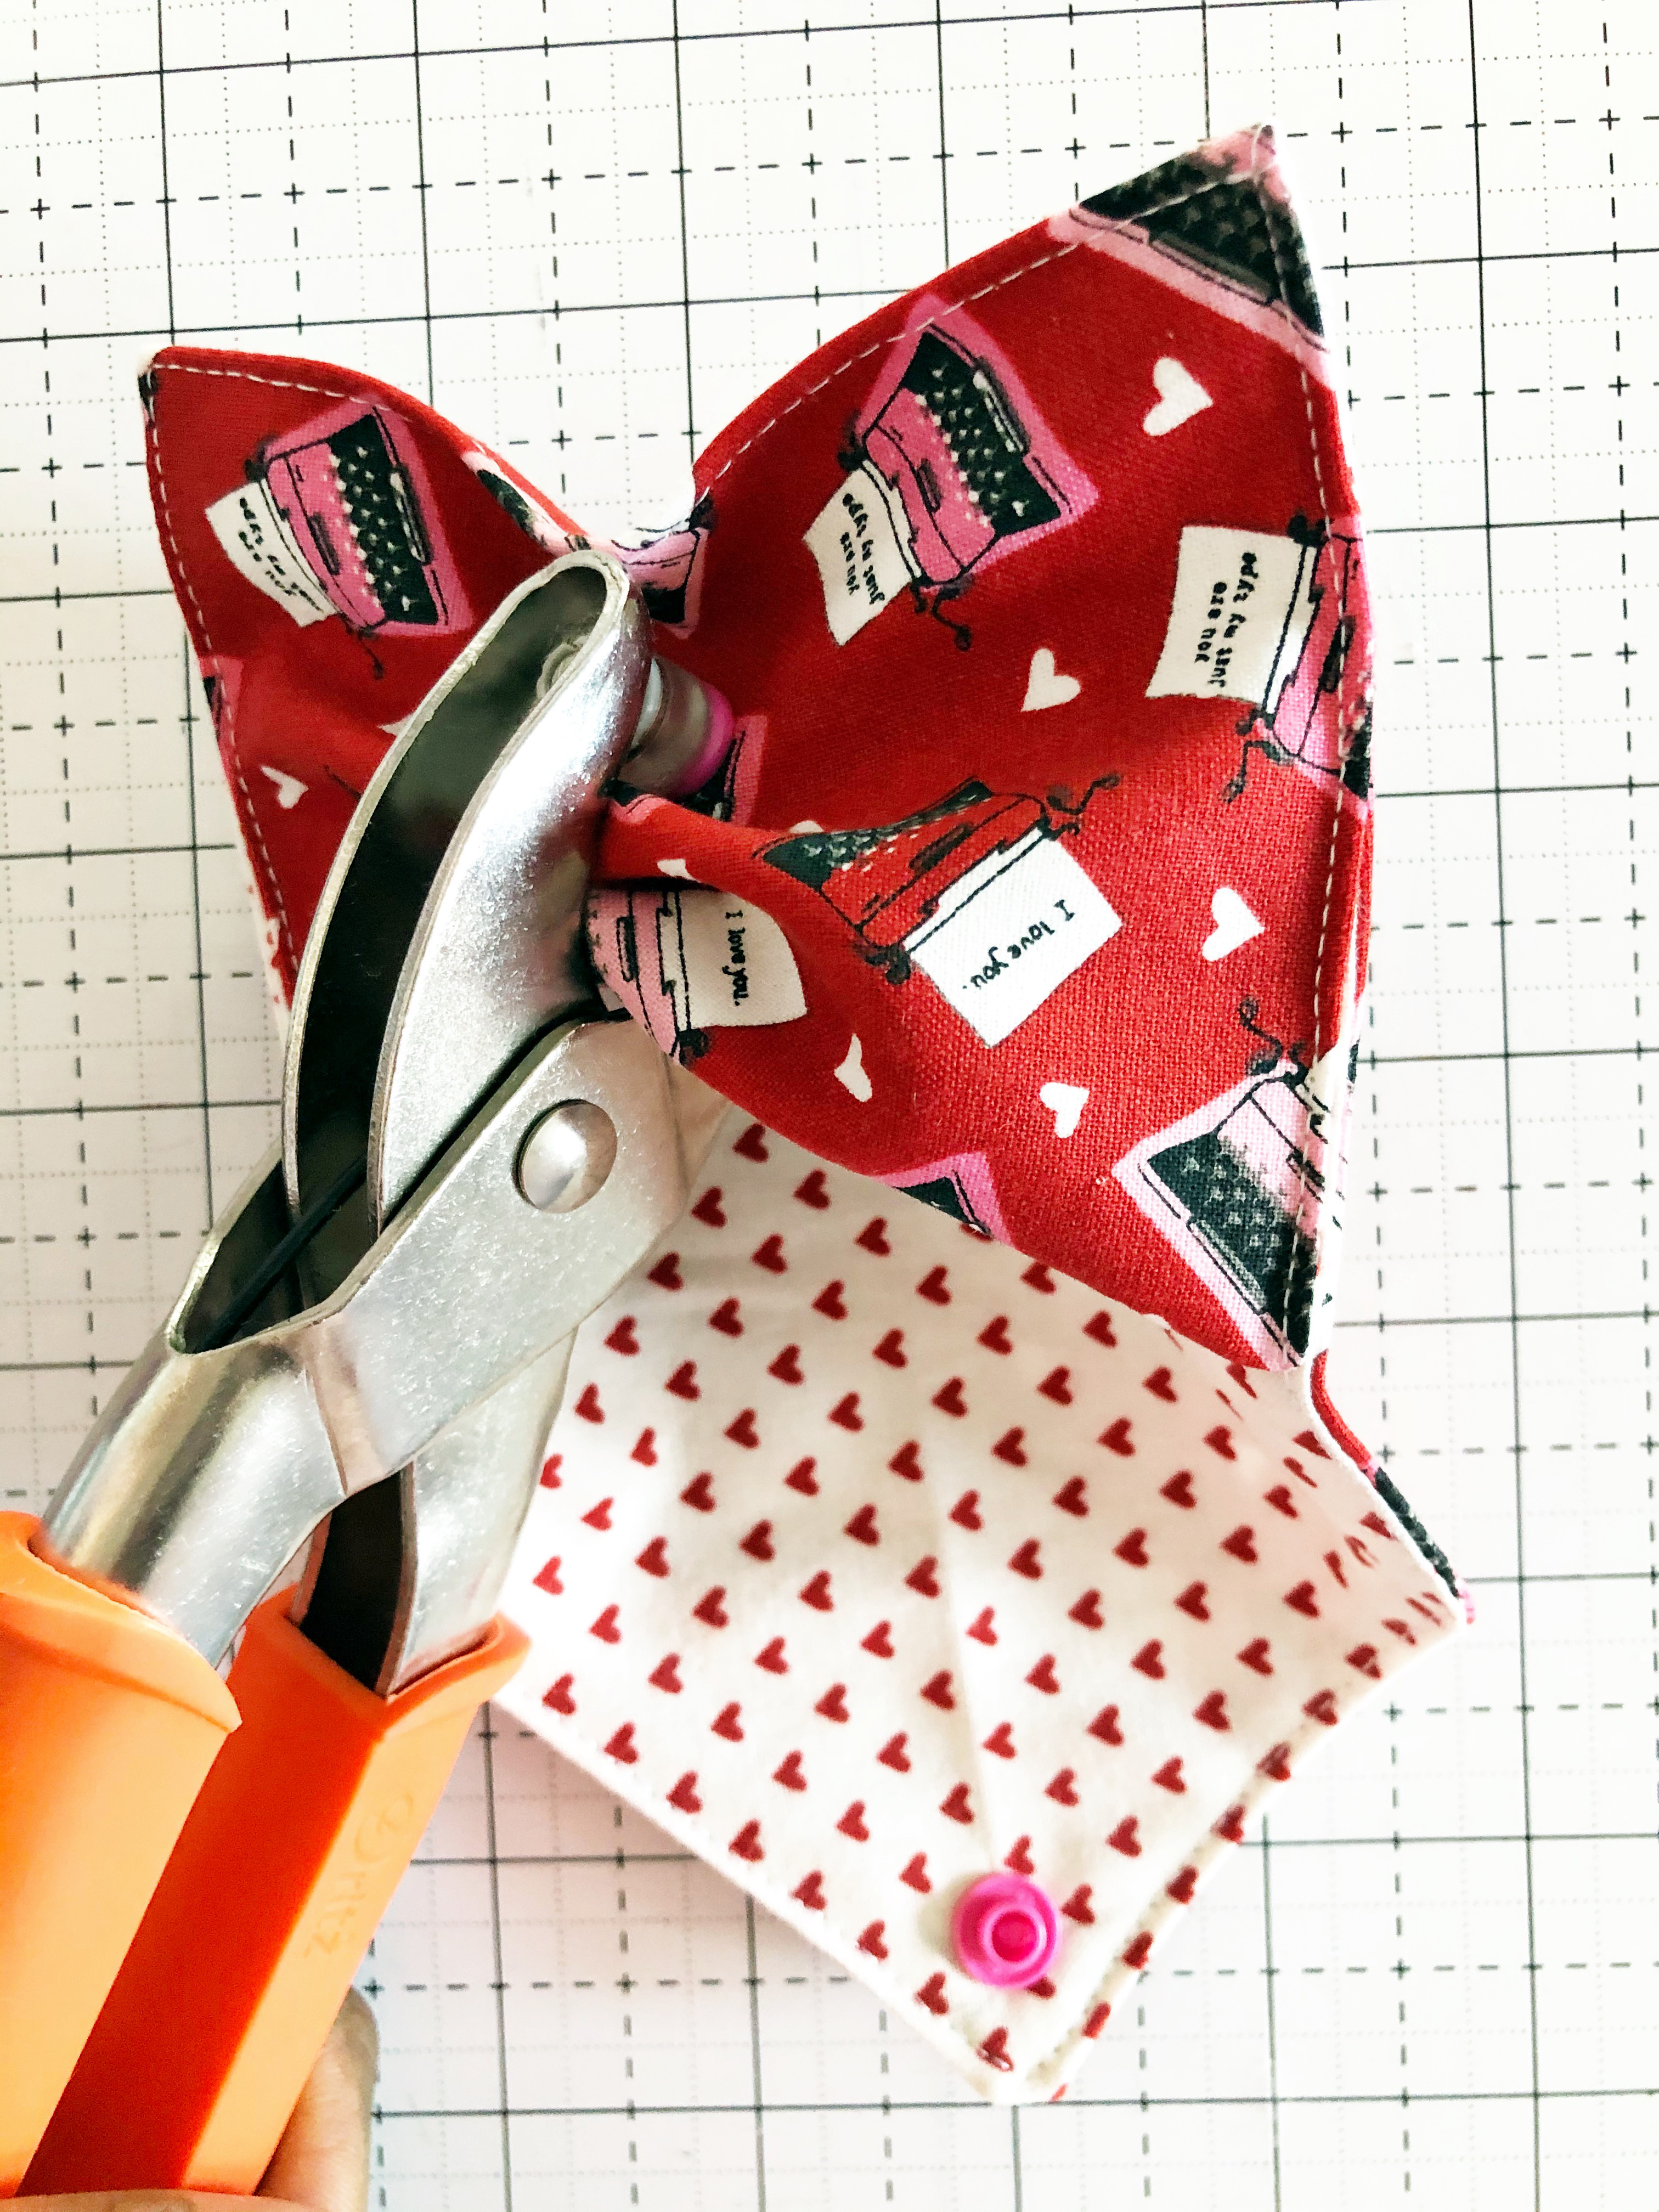 Fabric Envelope Tutorial: Attach the snap